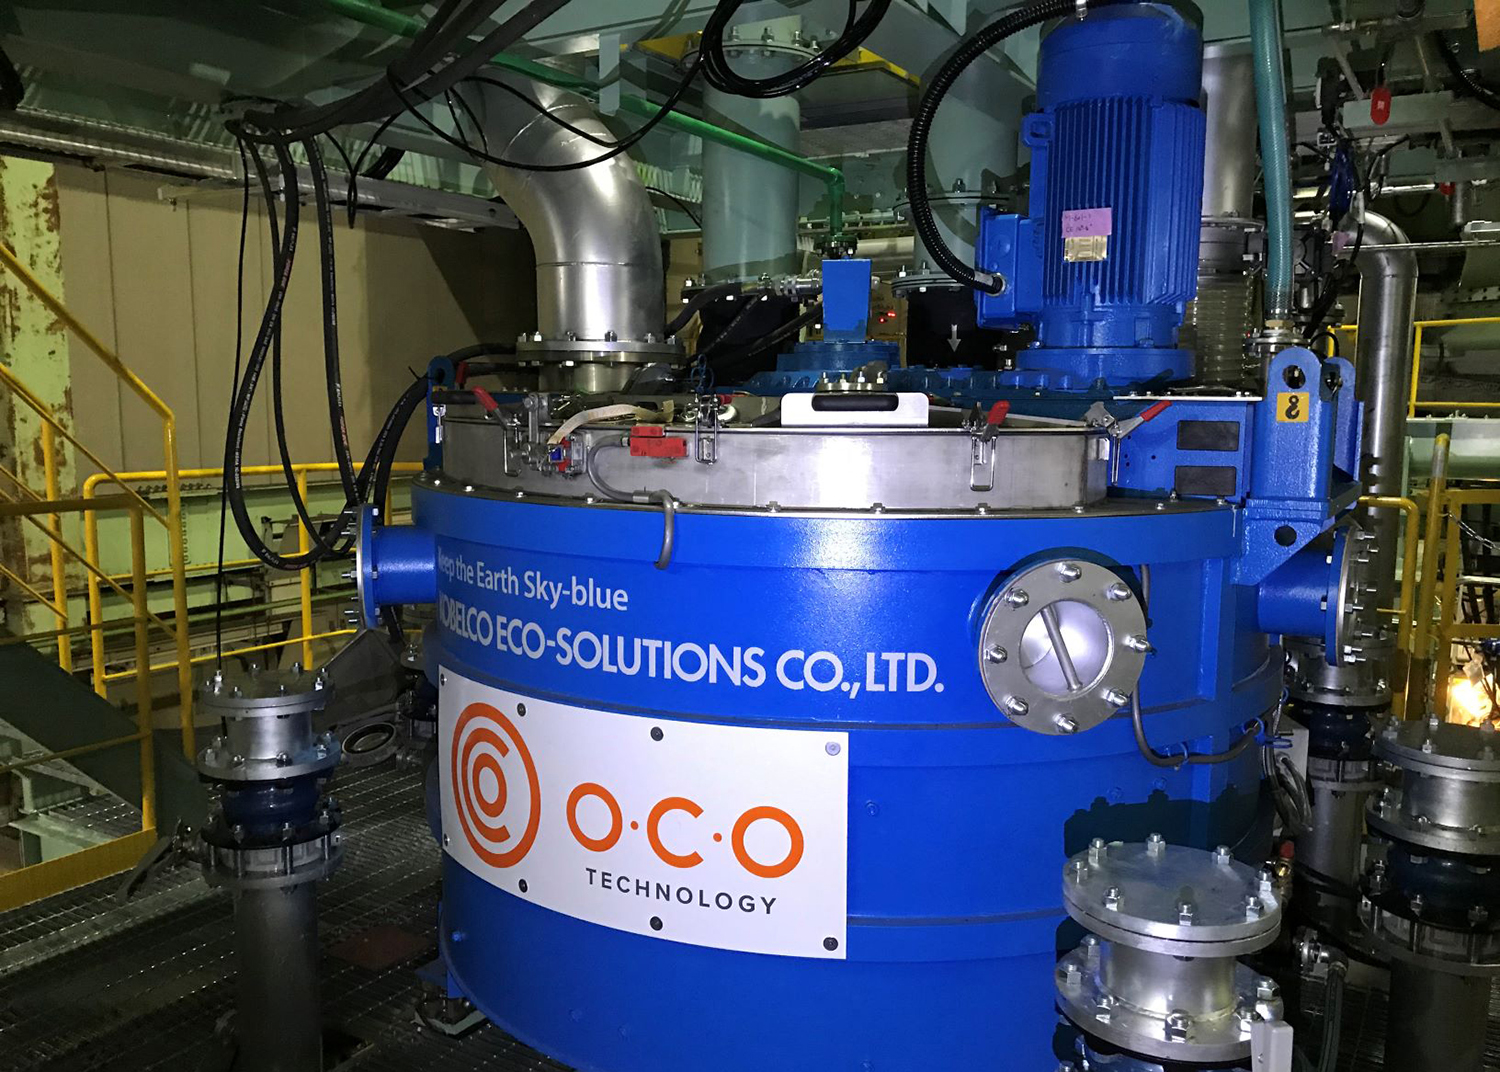 Image shows the mixer / CO2 reactor installed as part of O.C.O Technology’s first overseas trial CO2 treatment facility within an Energy from Waste (EfW) plant in Japan.